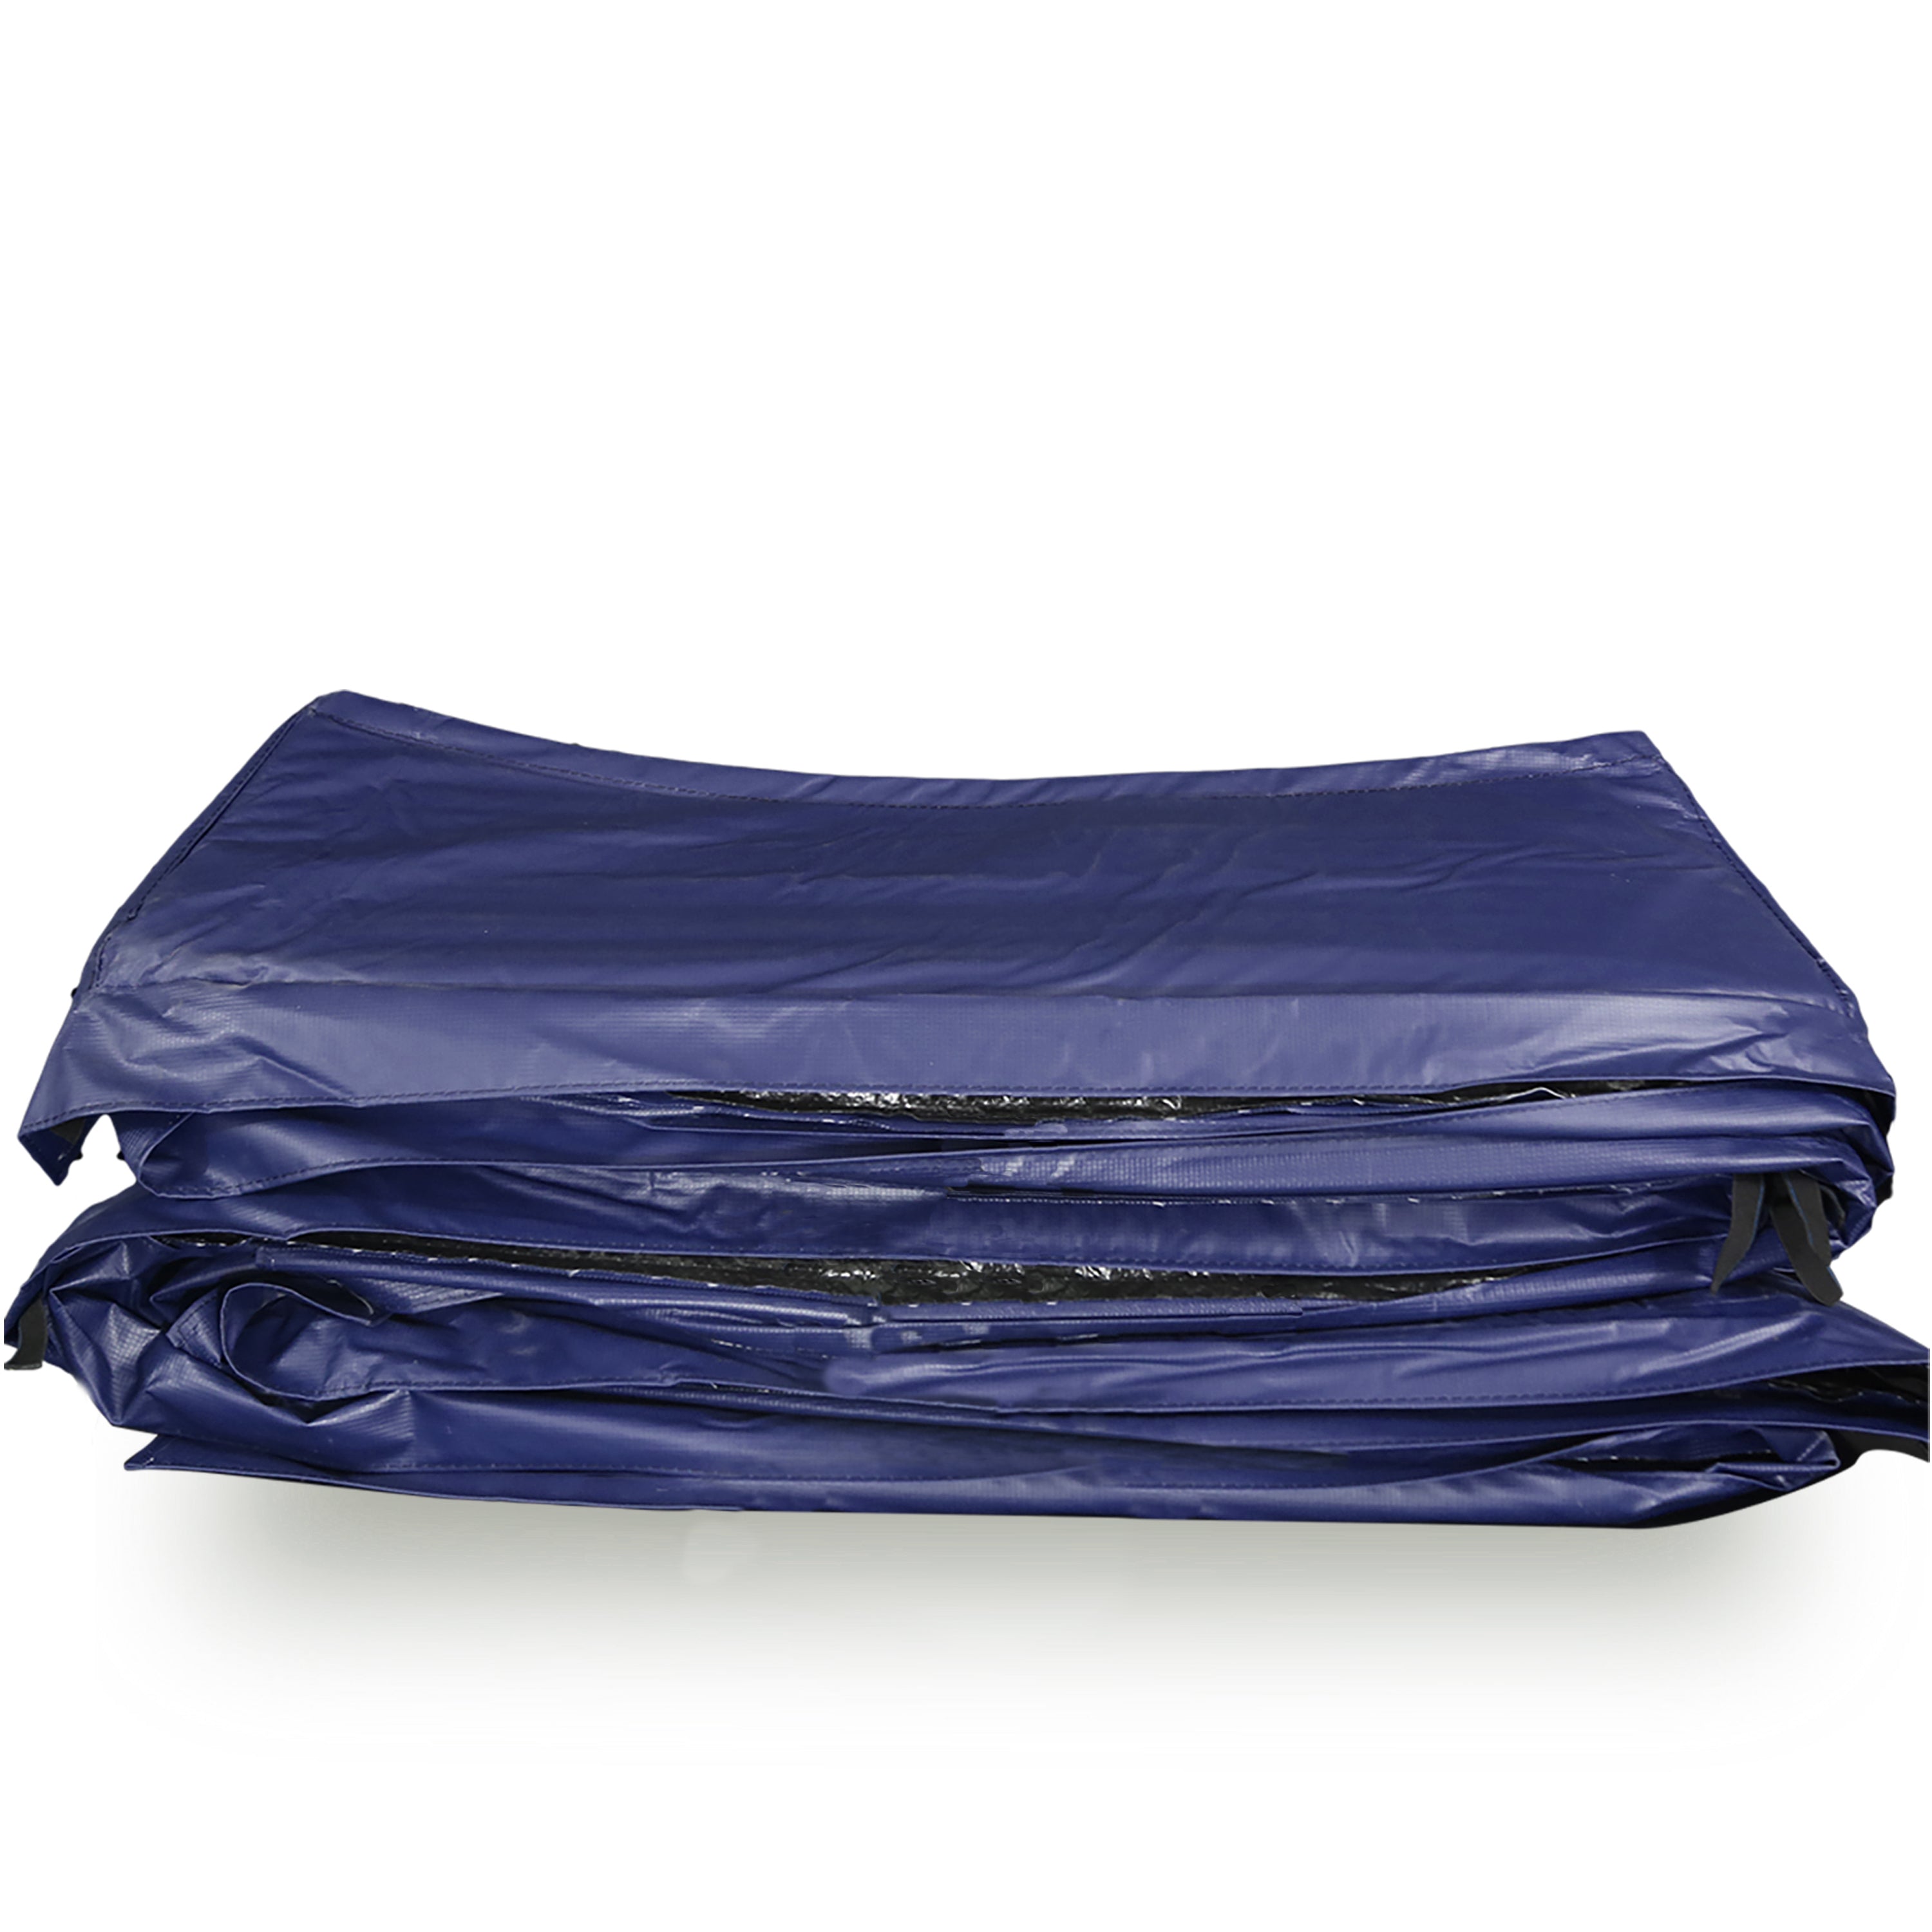 Navy spring pad is made out of UV-resistant PVC material. 